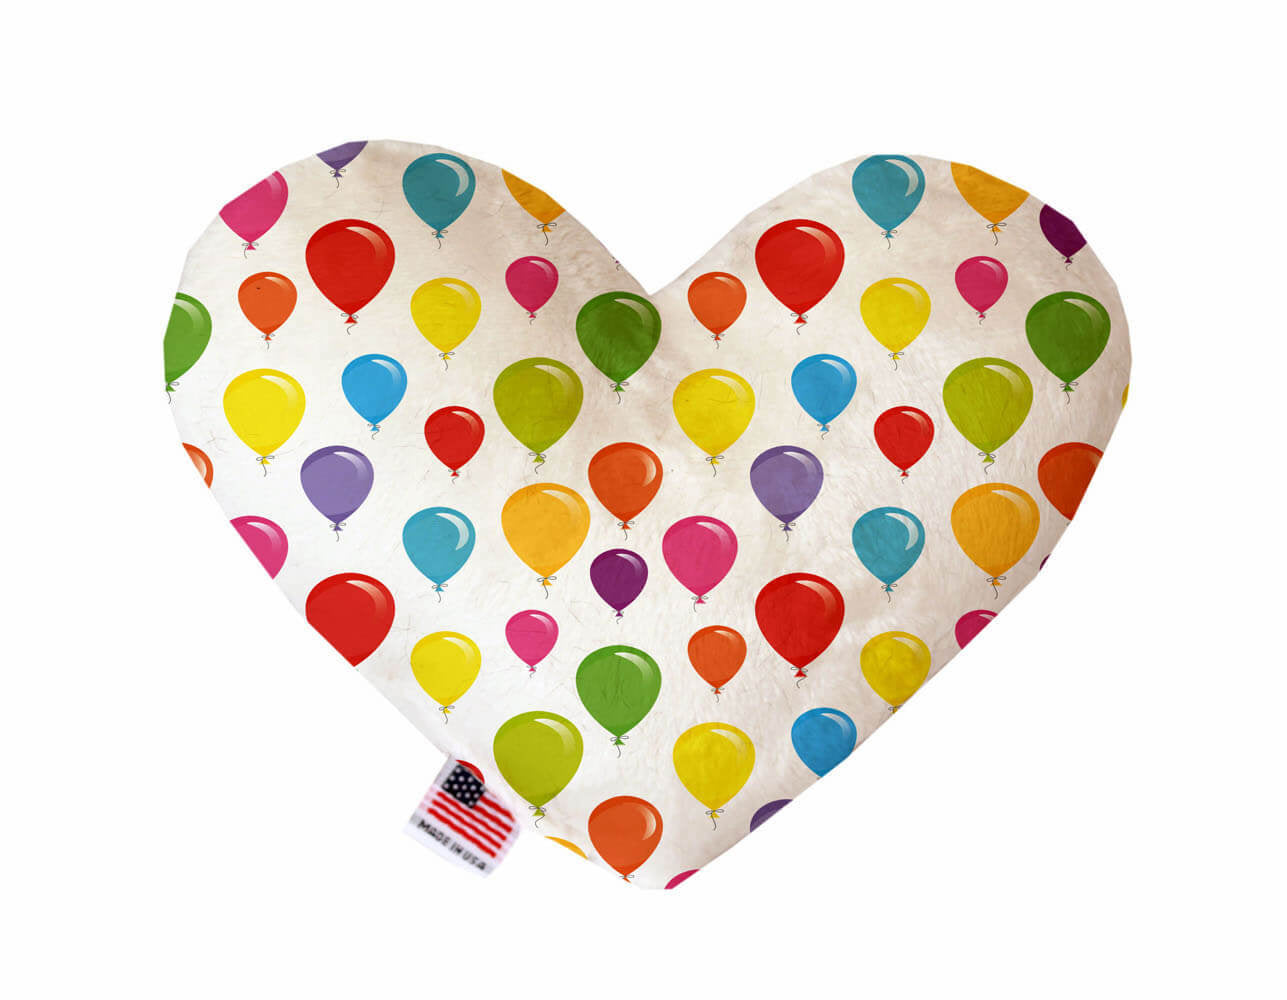 Heart shaped squeaker dog toy. White background with a multicolored balloon print. Made in USA label on bottom trim.